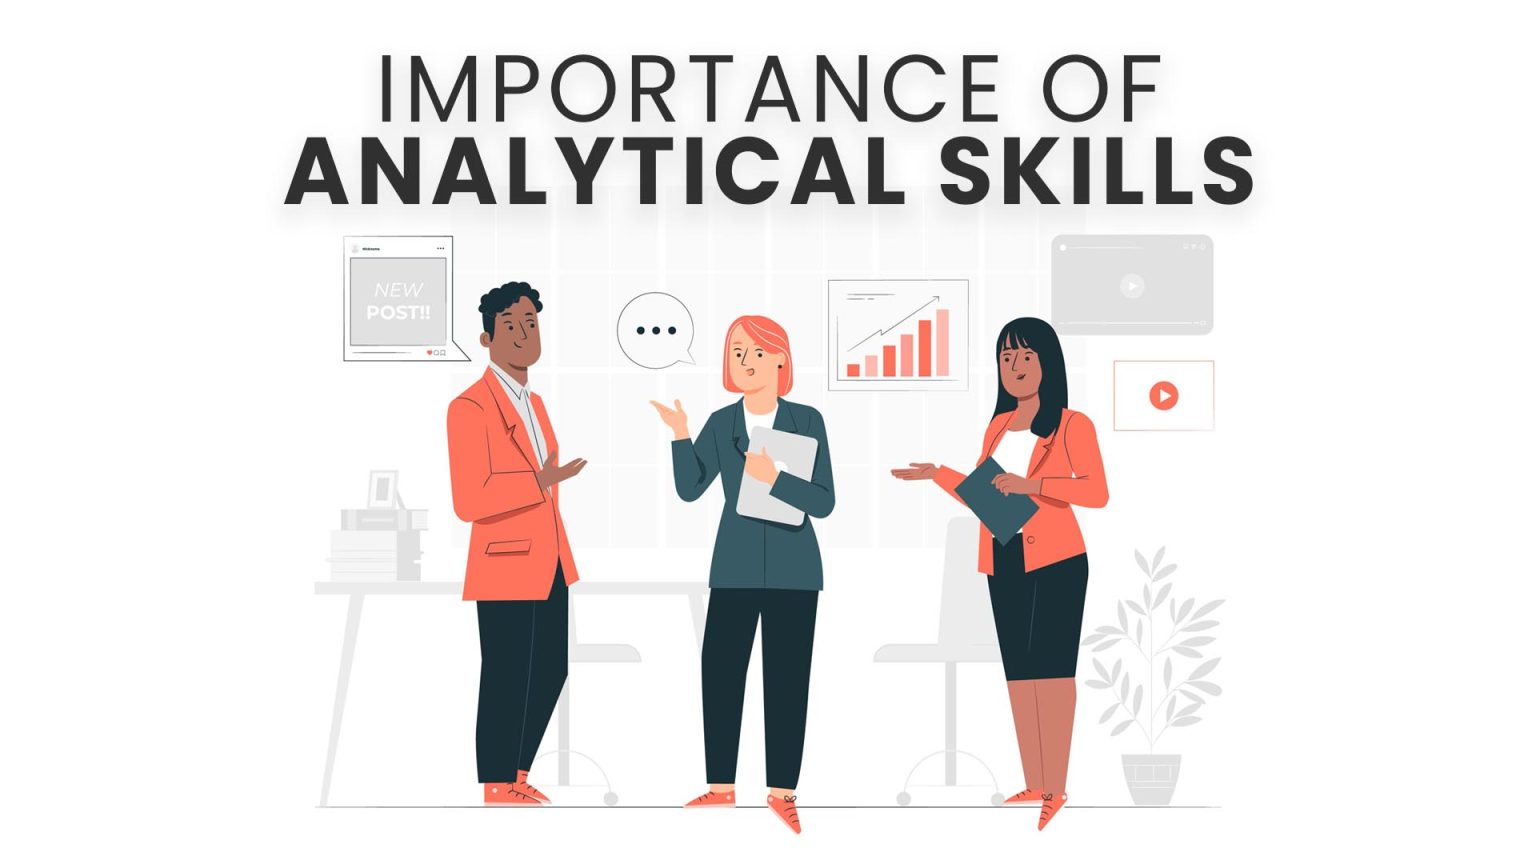 research and analytical skills at work